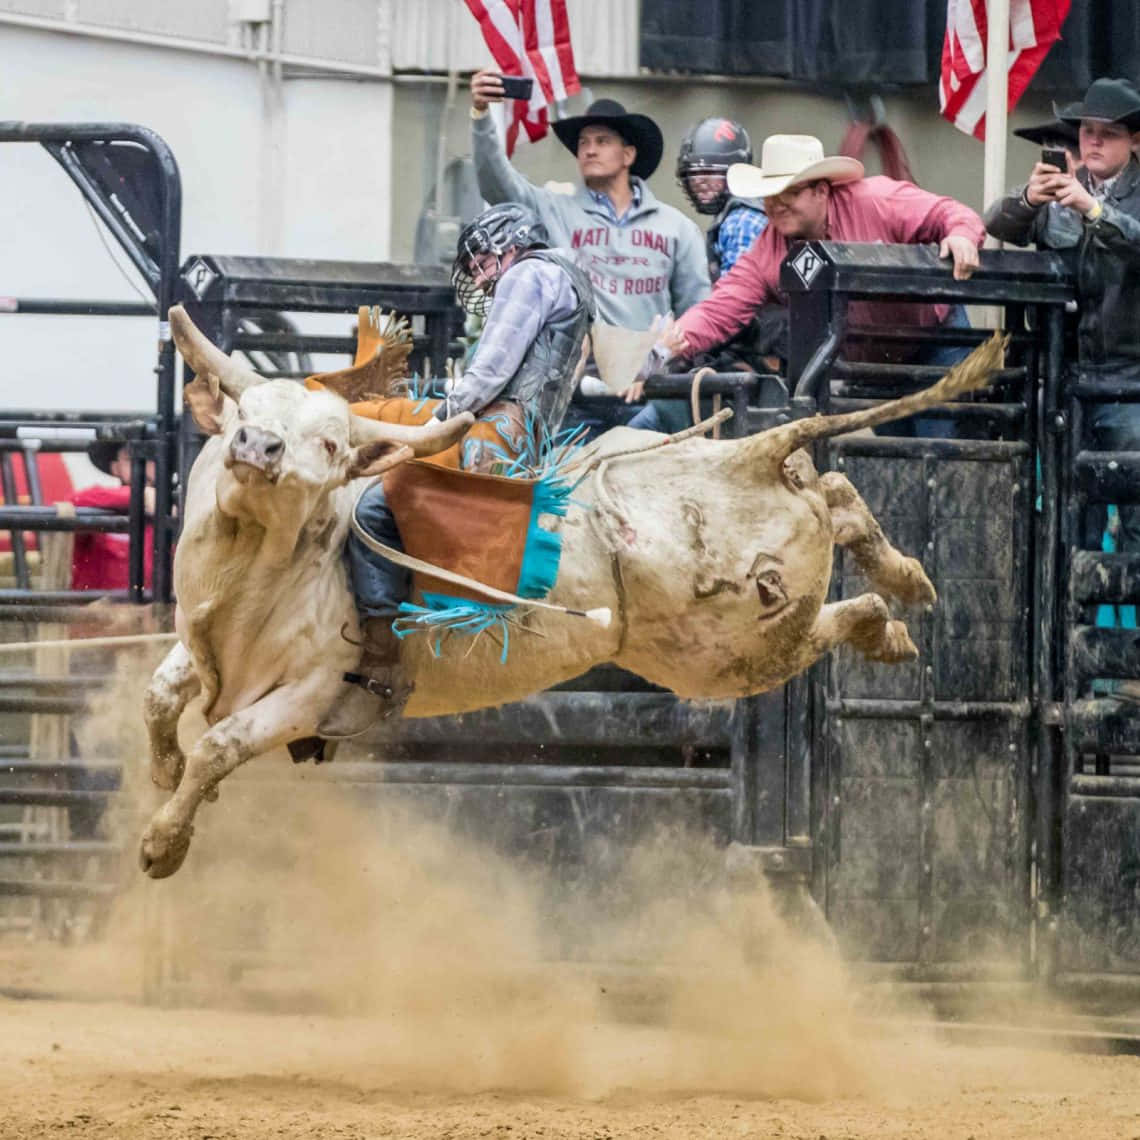 Professional Bull Riders Ready to Compete